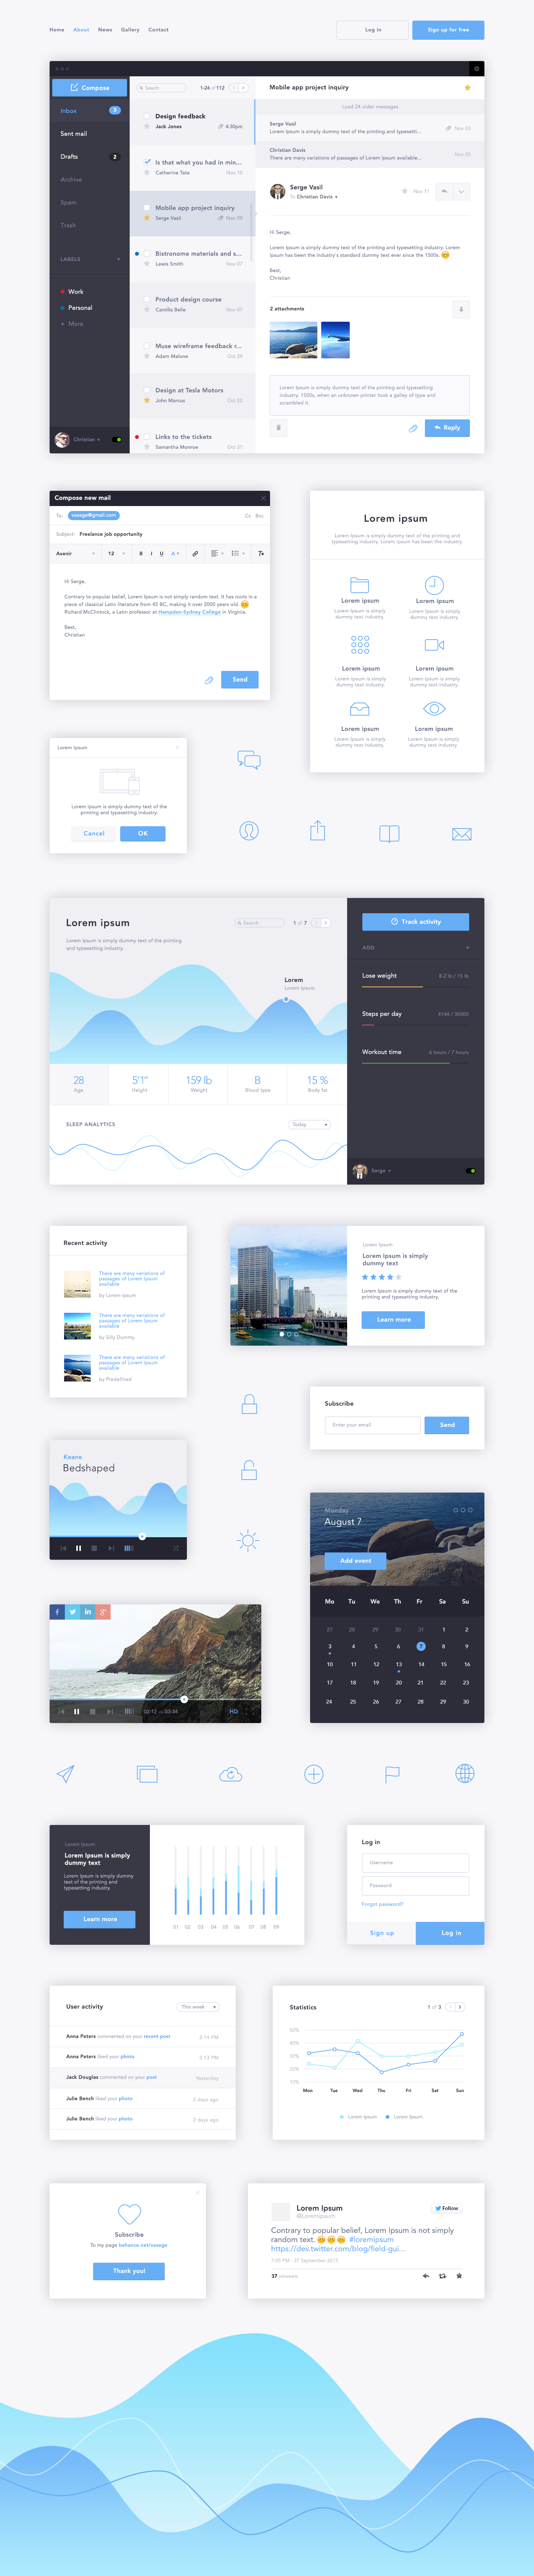 product UI ux Style Guide flat clean blue Email Client graph player video Popup Interface